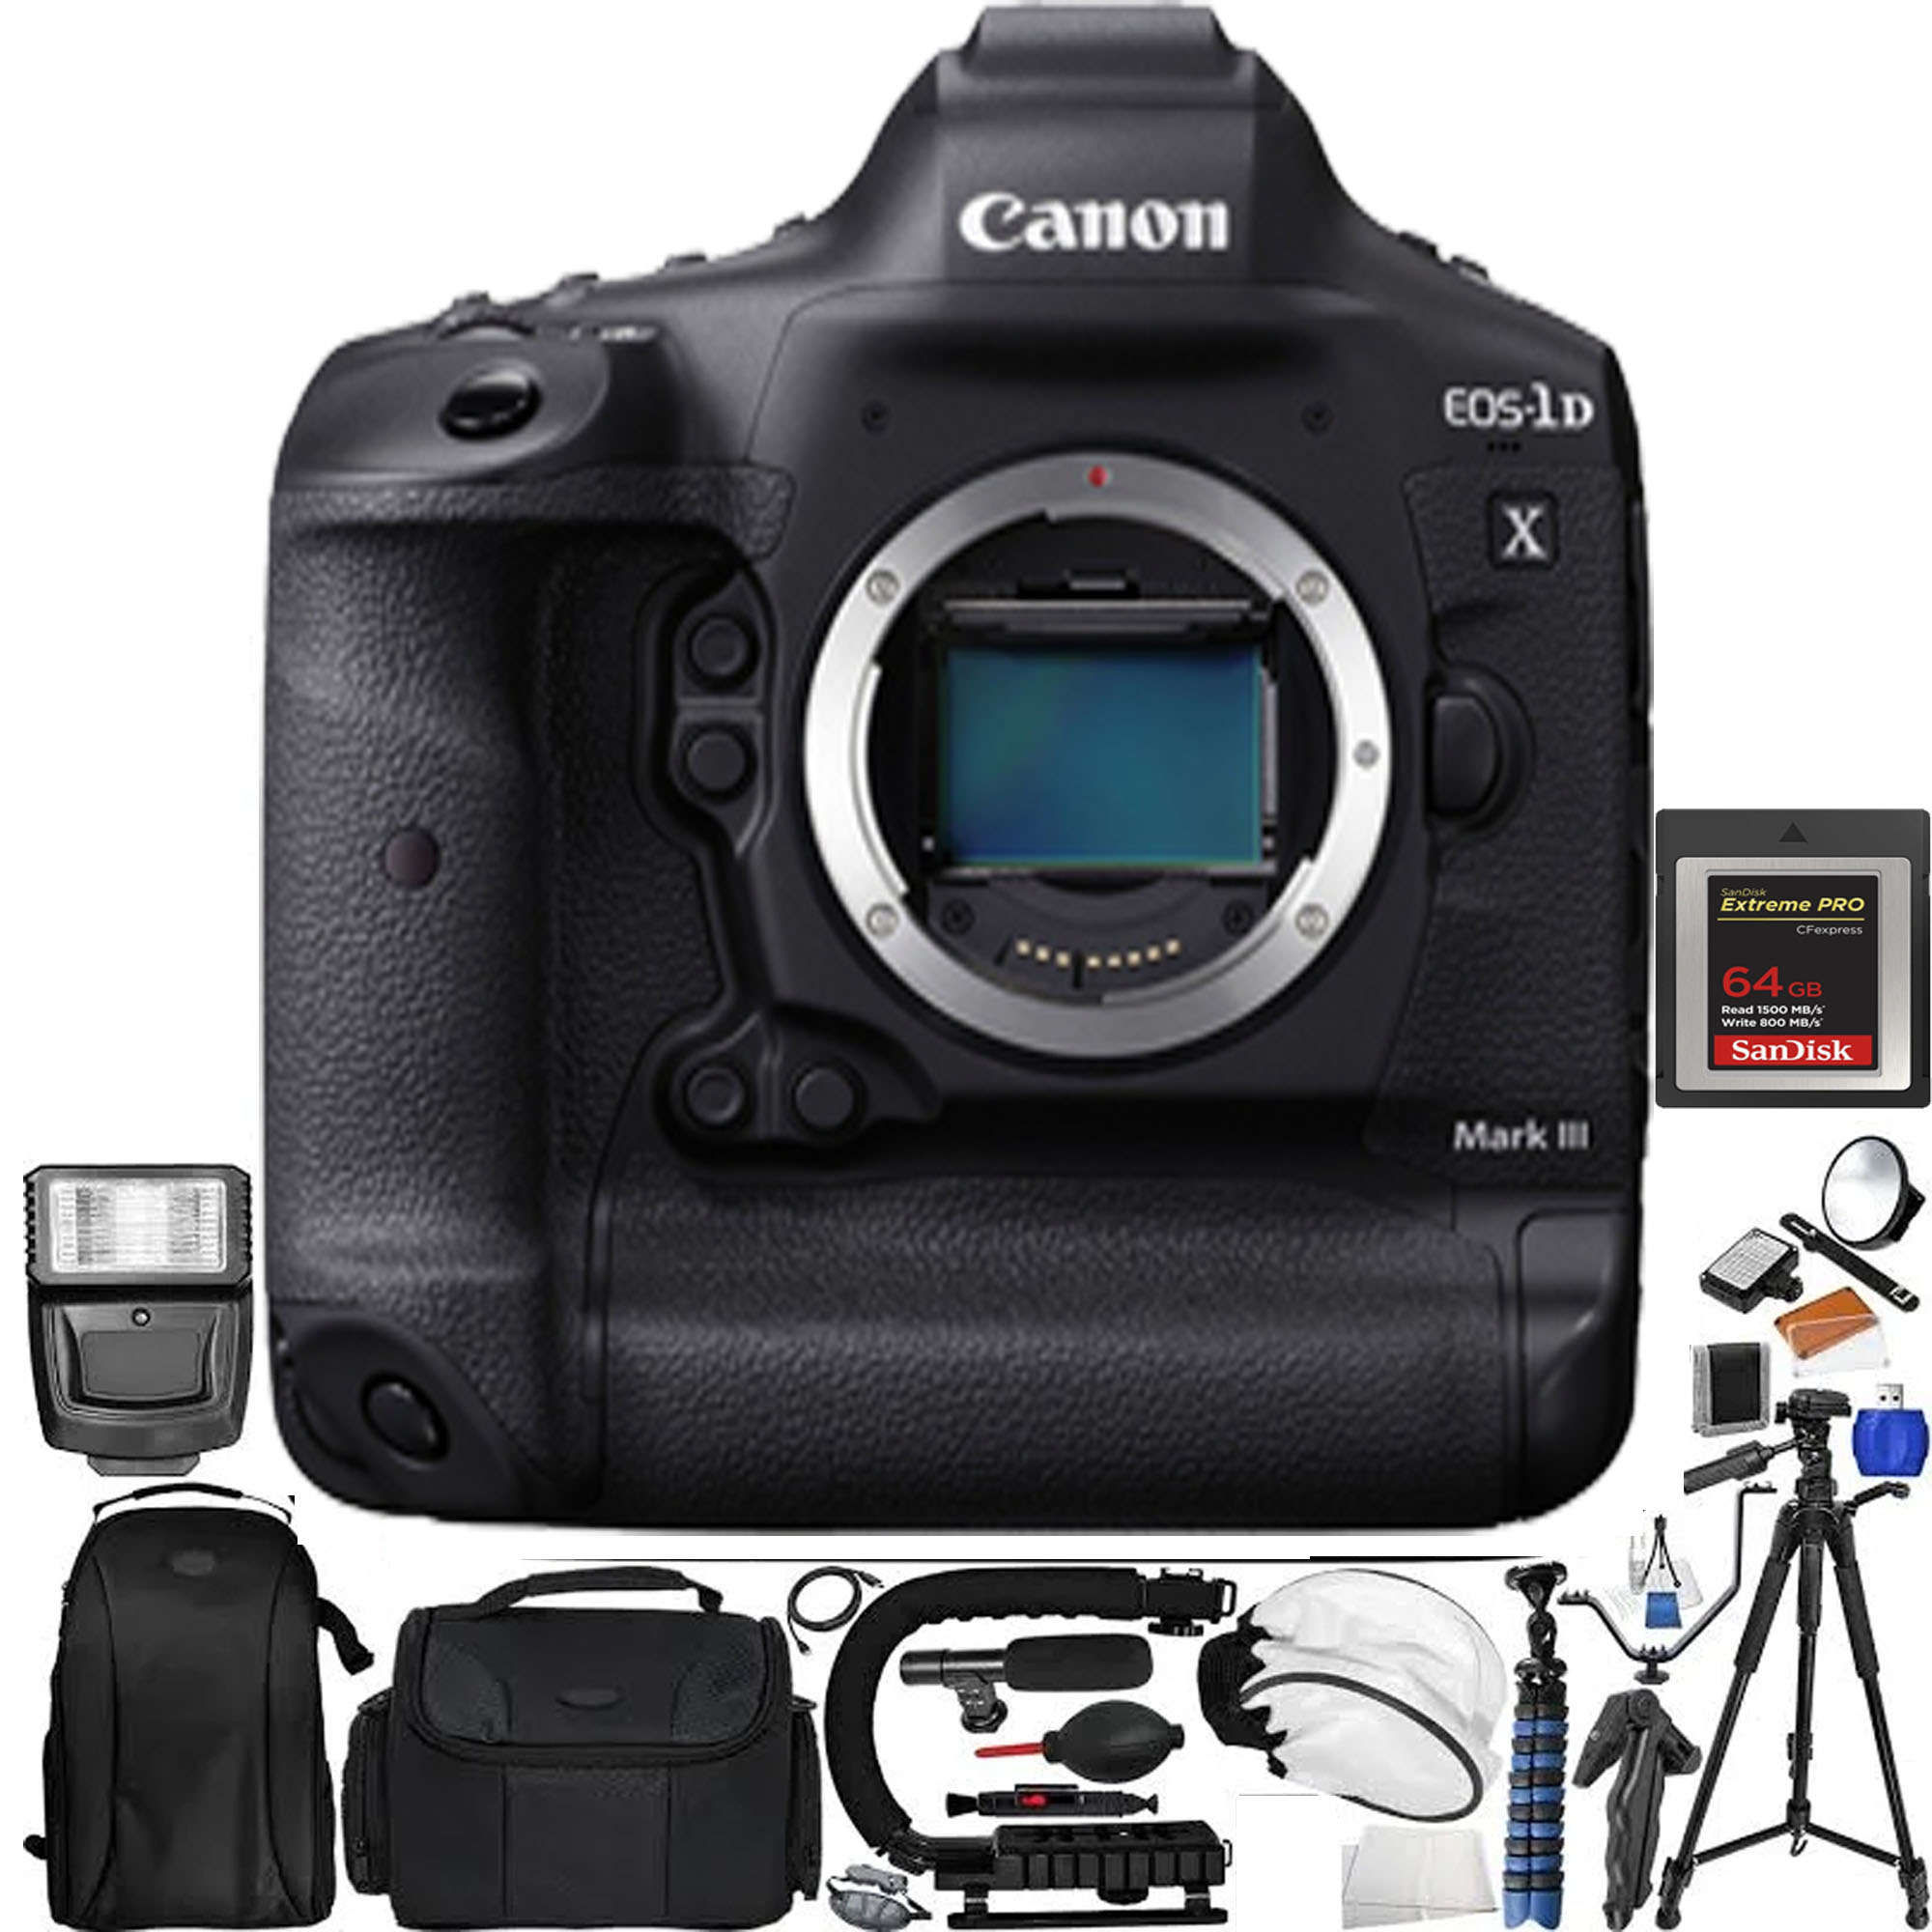 Canon EOS-1D X Mark III DSLR Camera (Body Only) with Essential Bundle Package - image 1 of 1